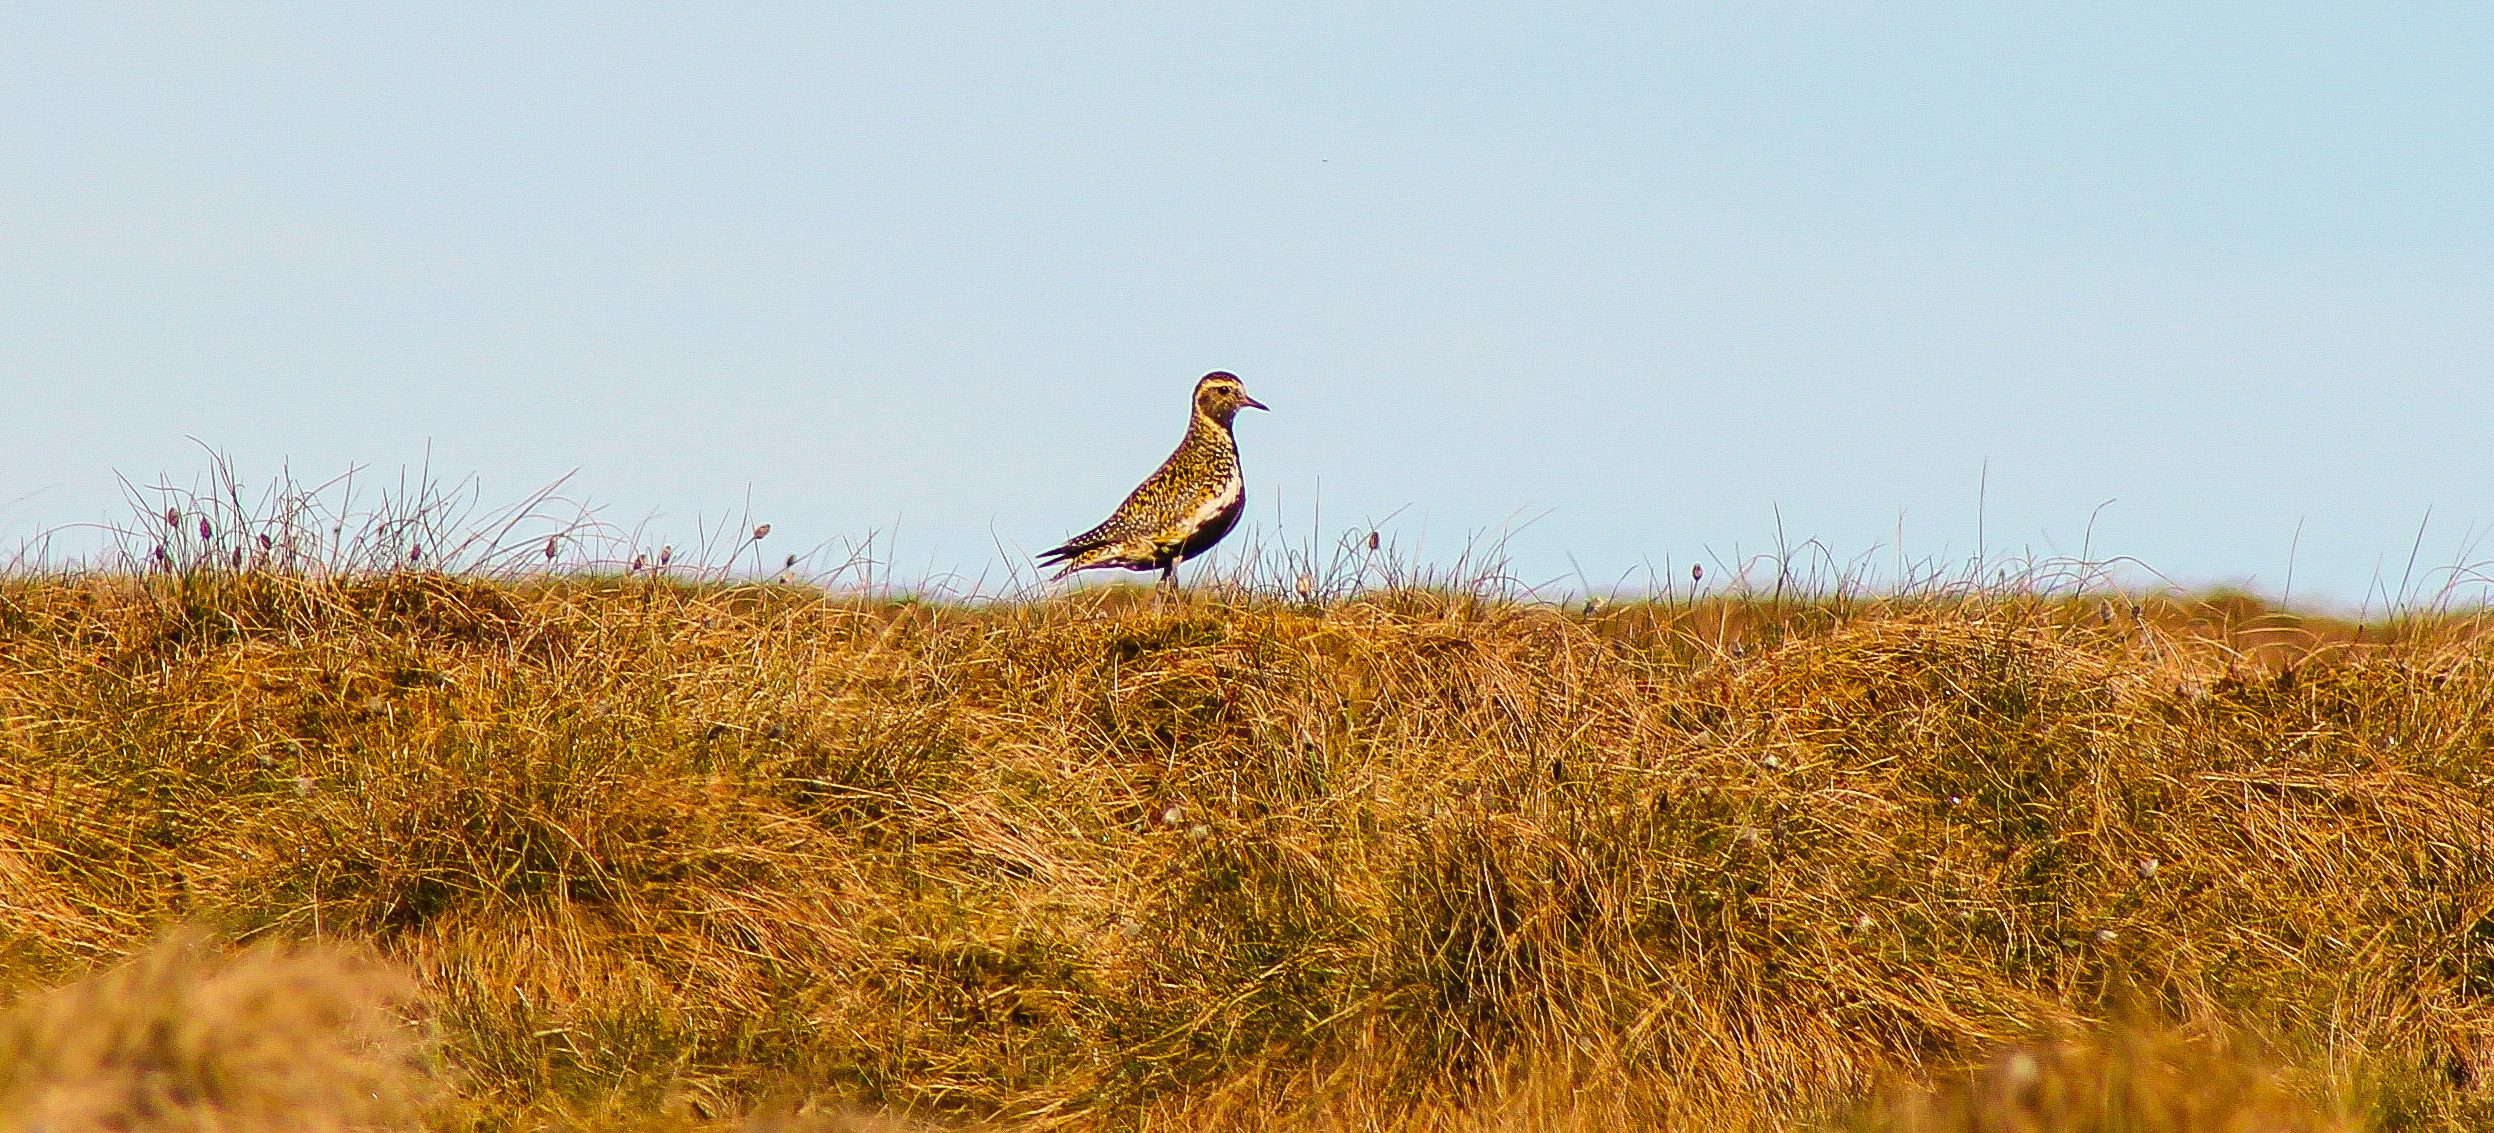 A Golden Plover on the ground